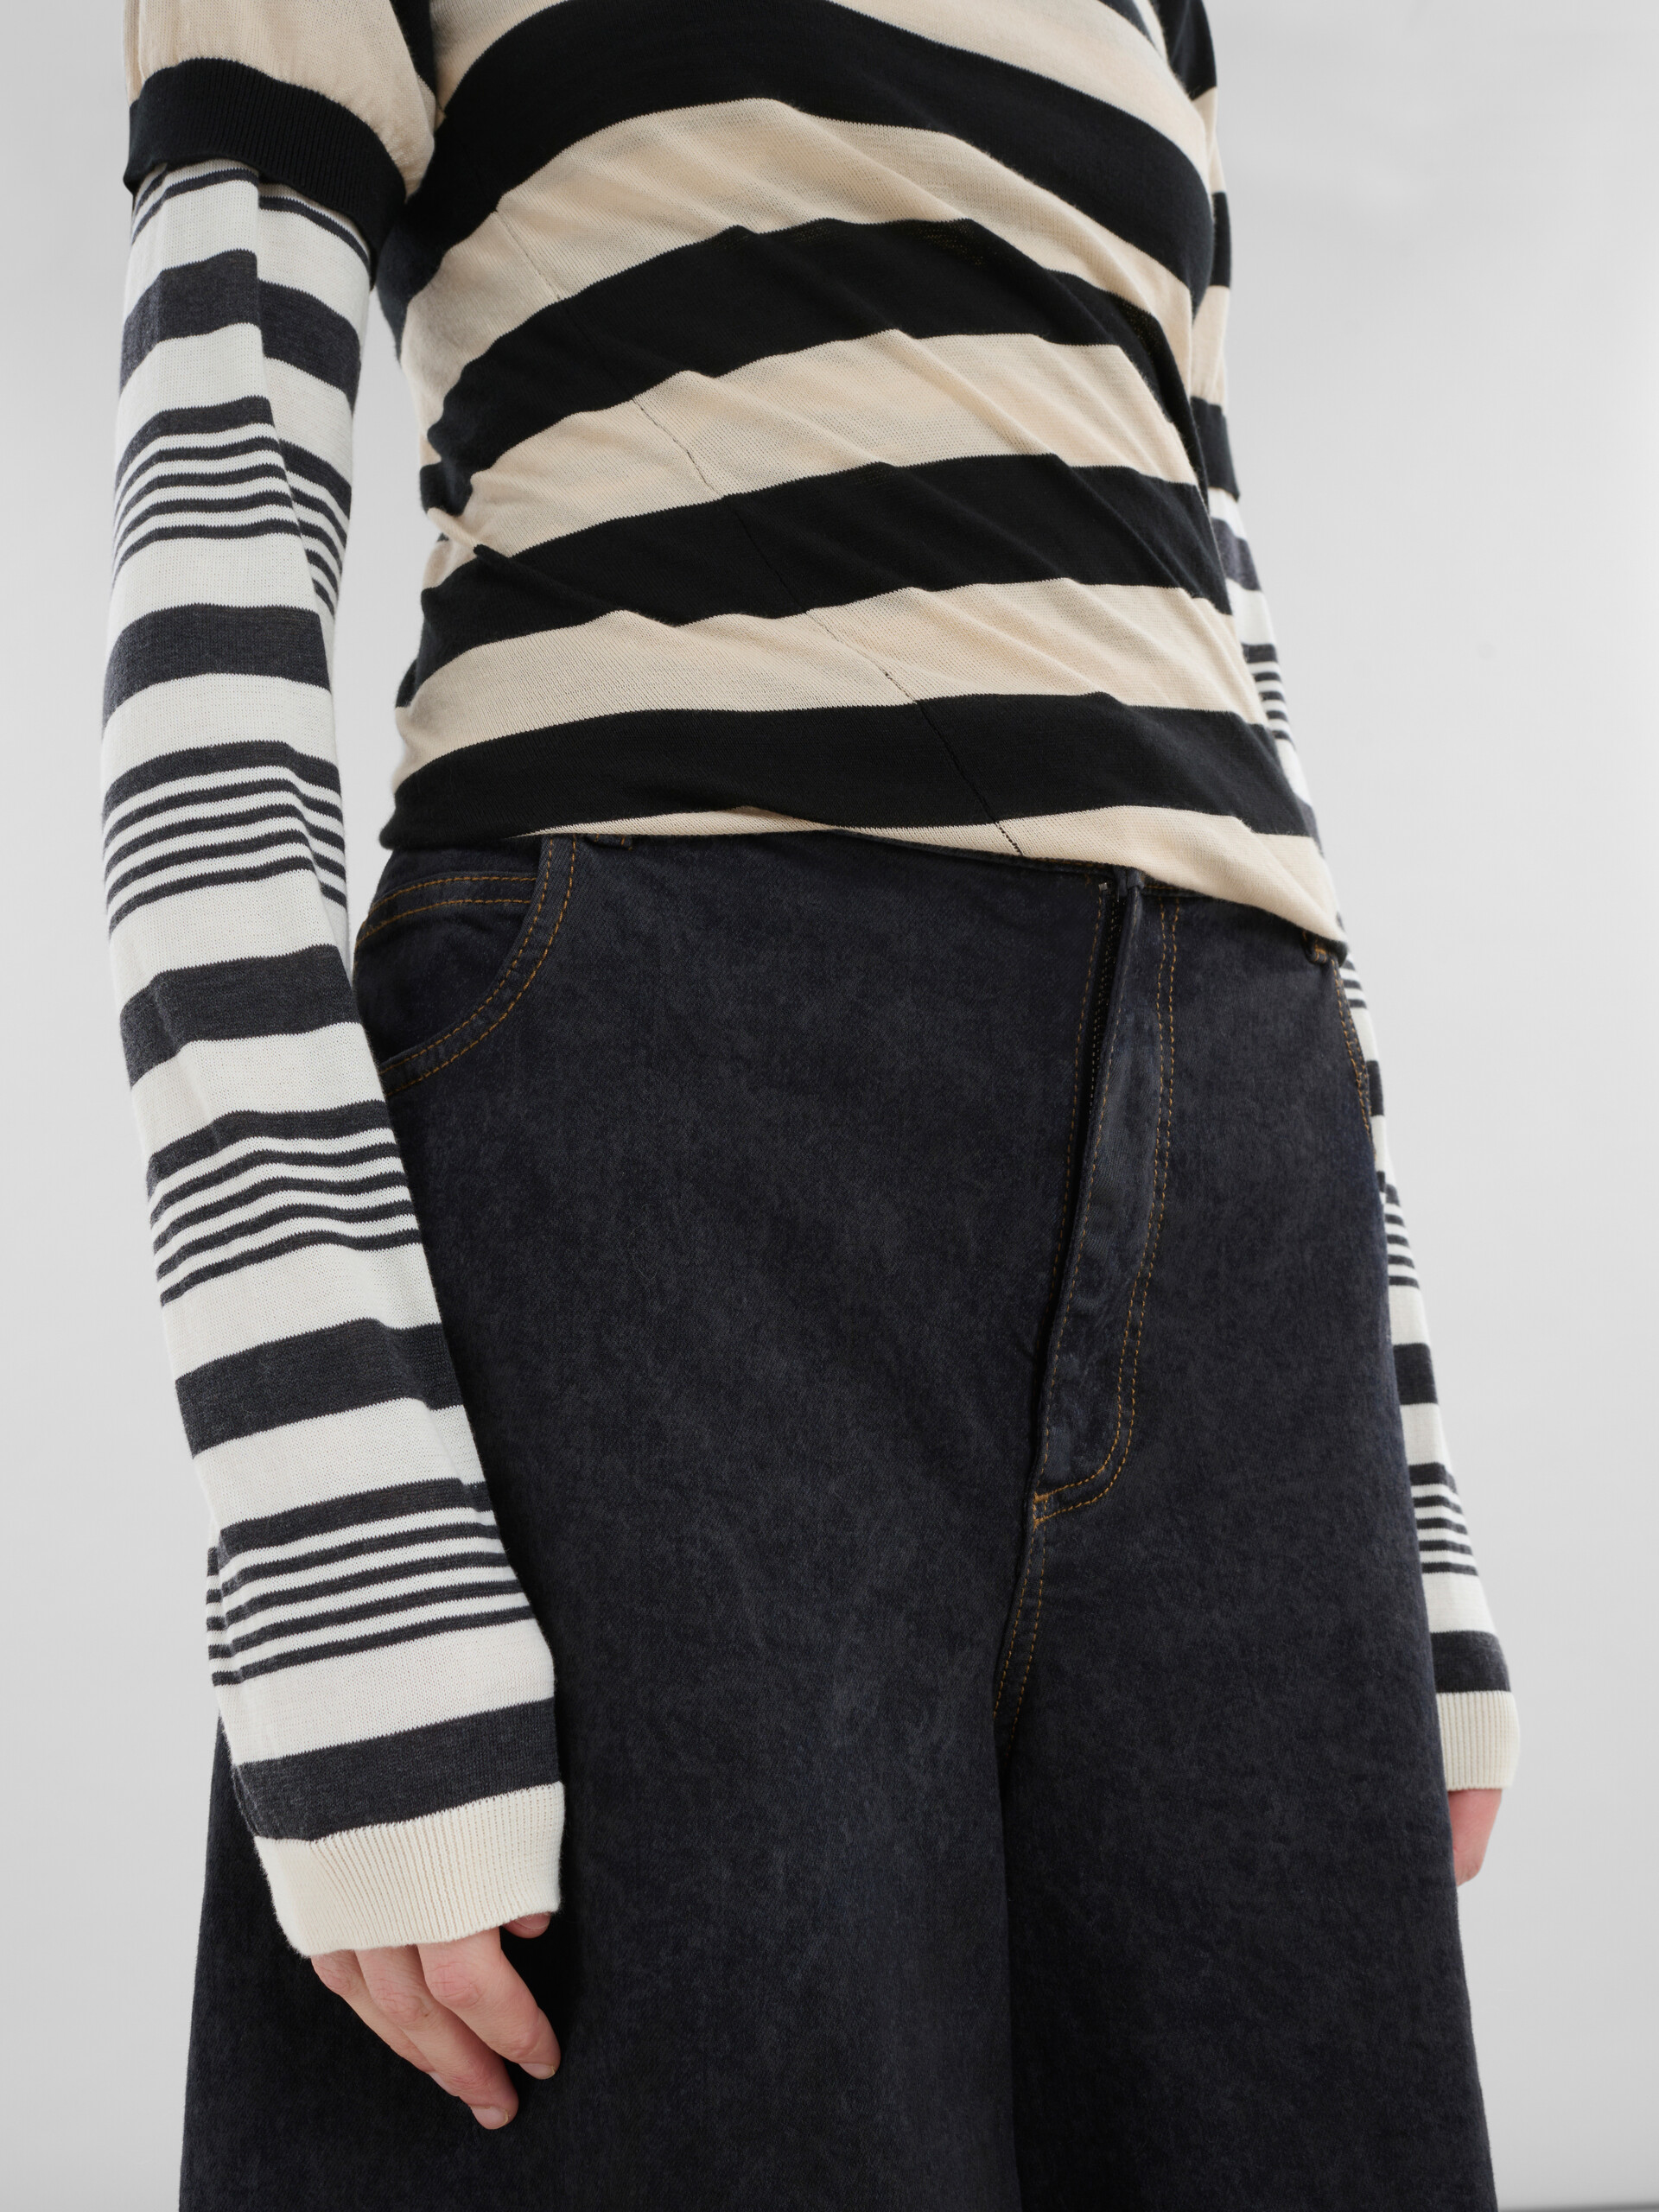 Black and white layered cotton crew-neck with contrast stripes - Pullovers - Image 4